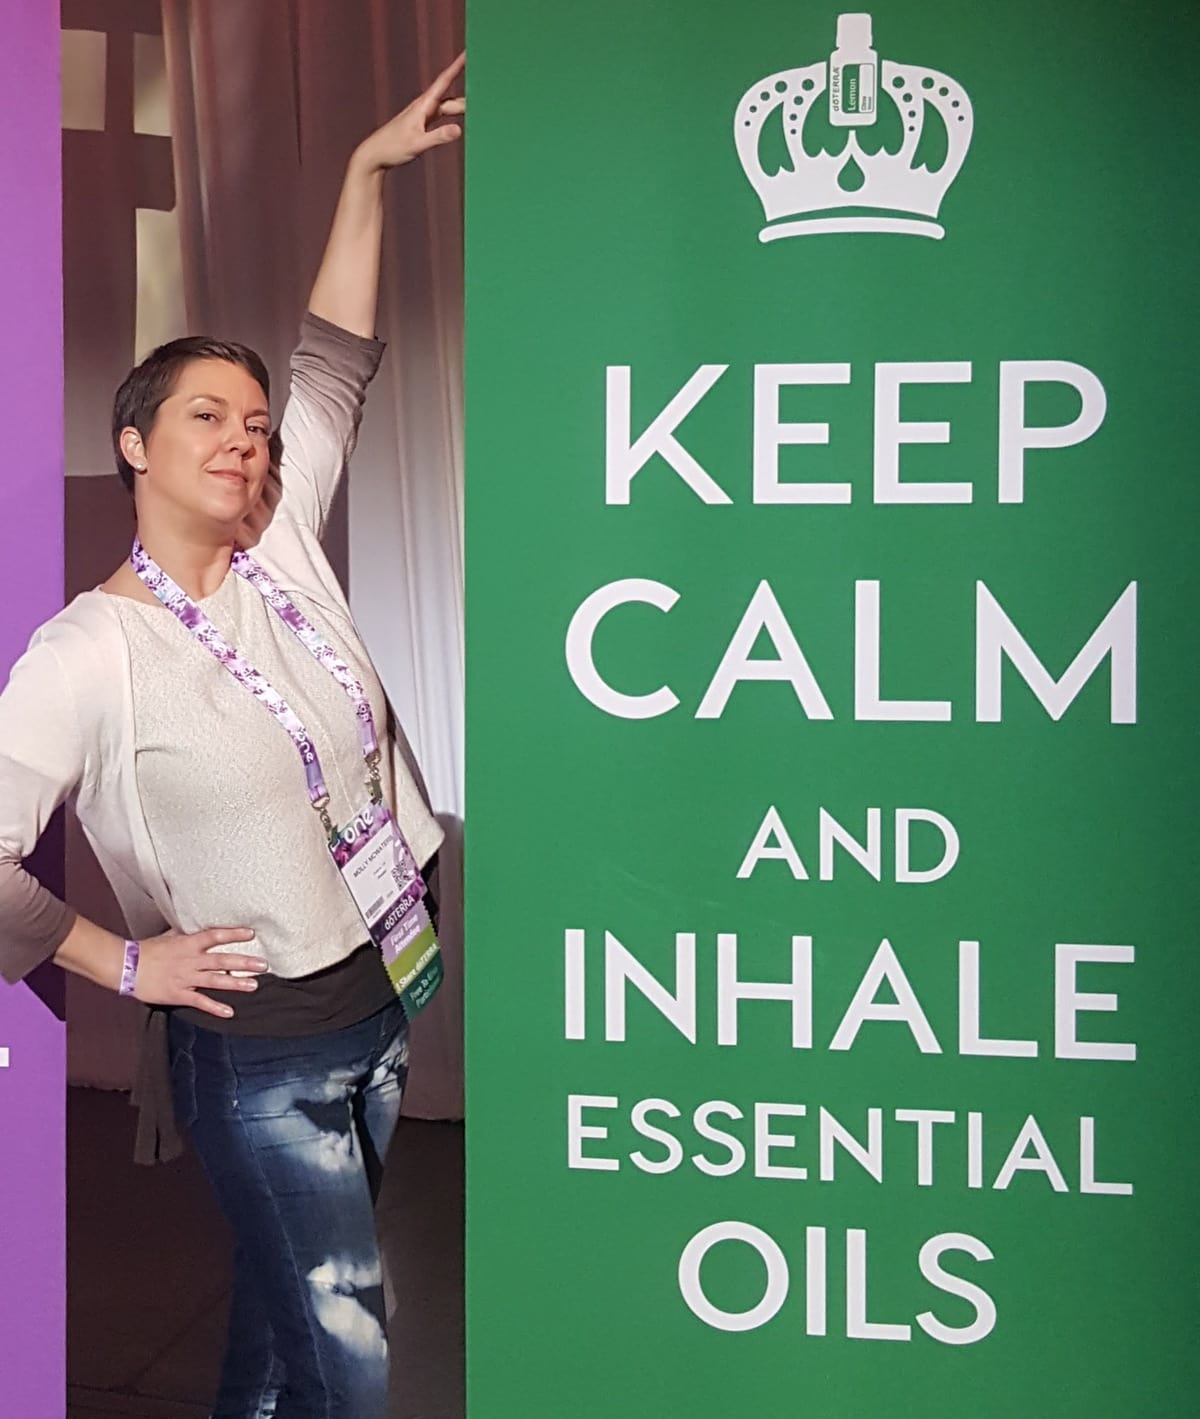 Molly says keep calm with essential oils